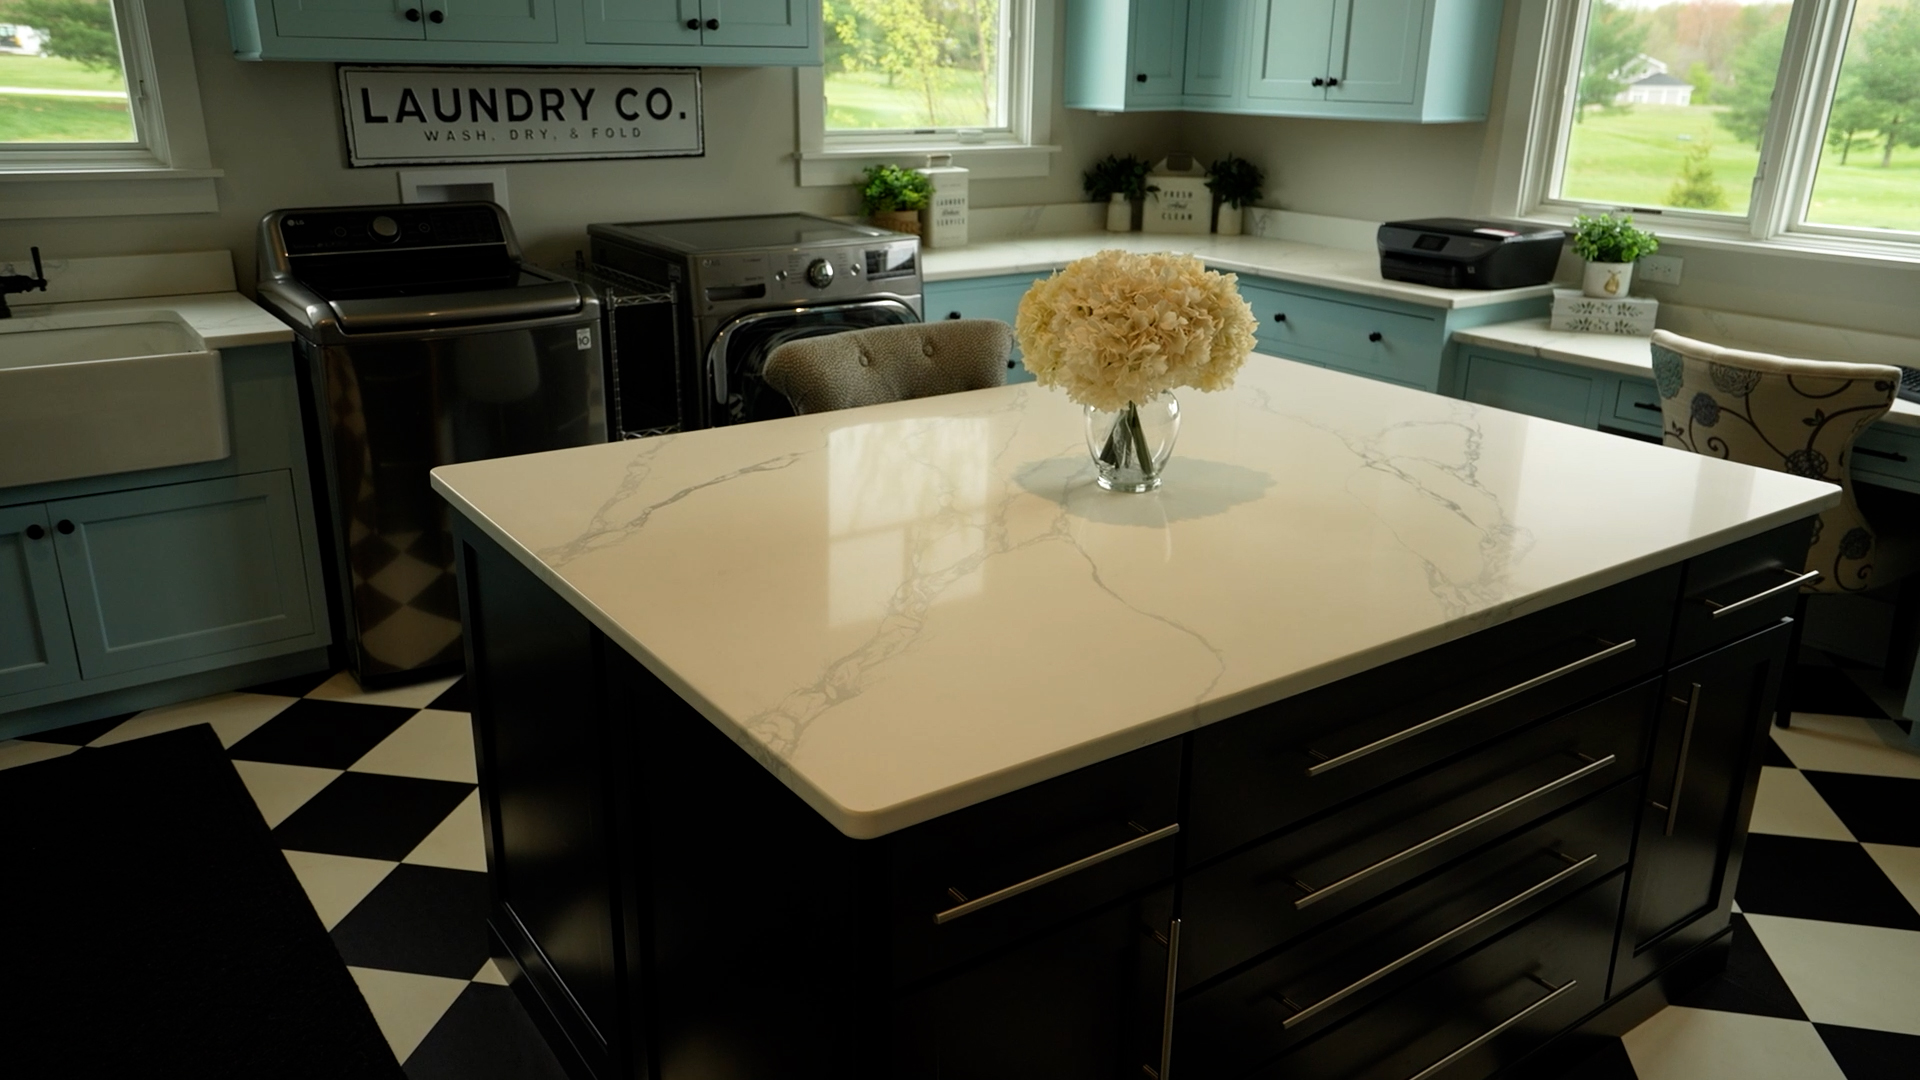 Granite example from Valere Studios video production with a remodeling company in Cincinnati